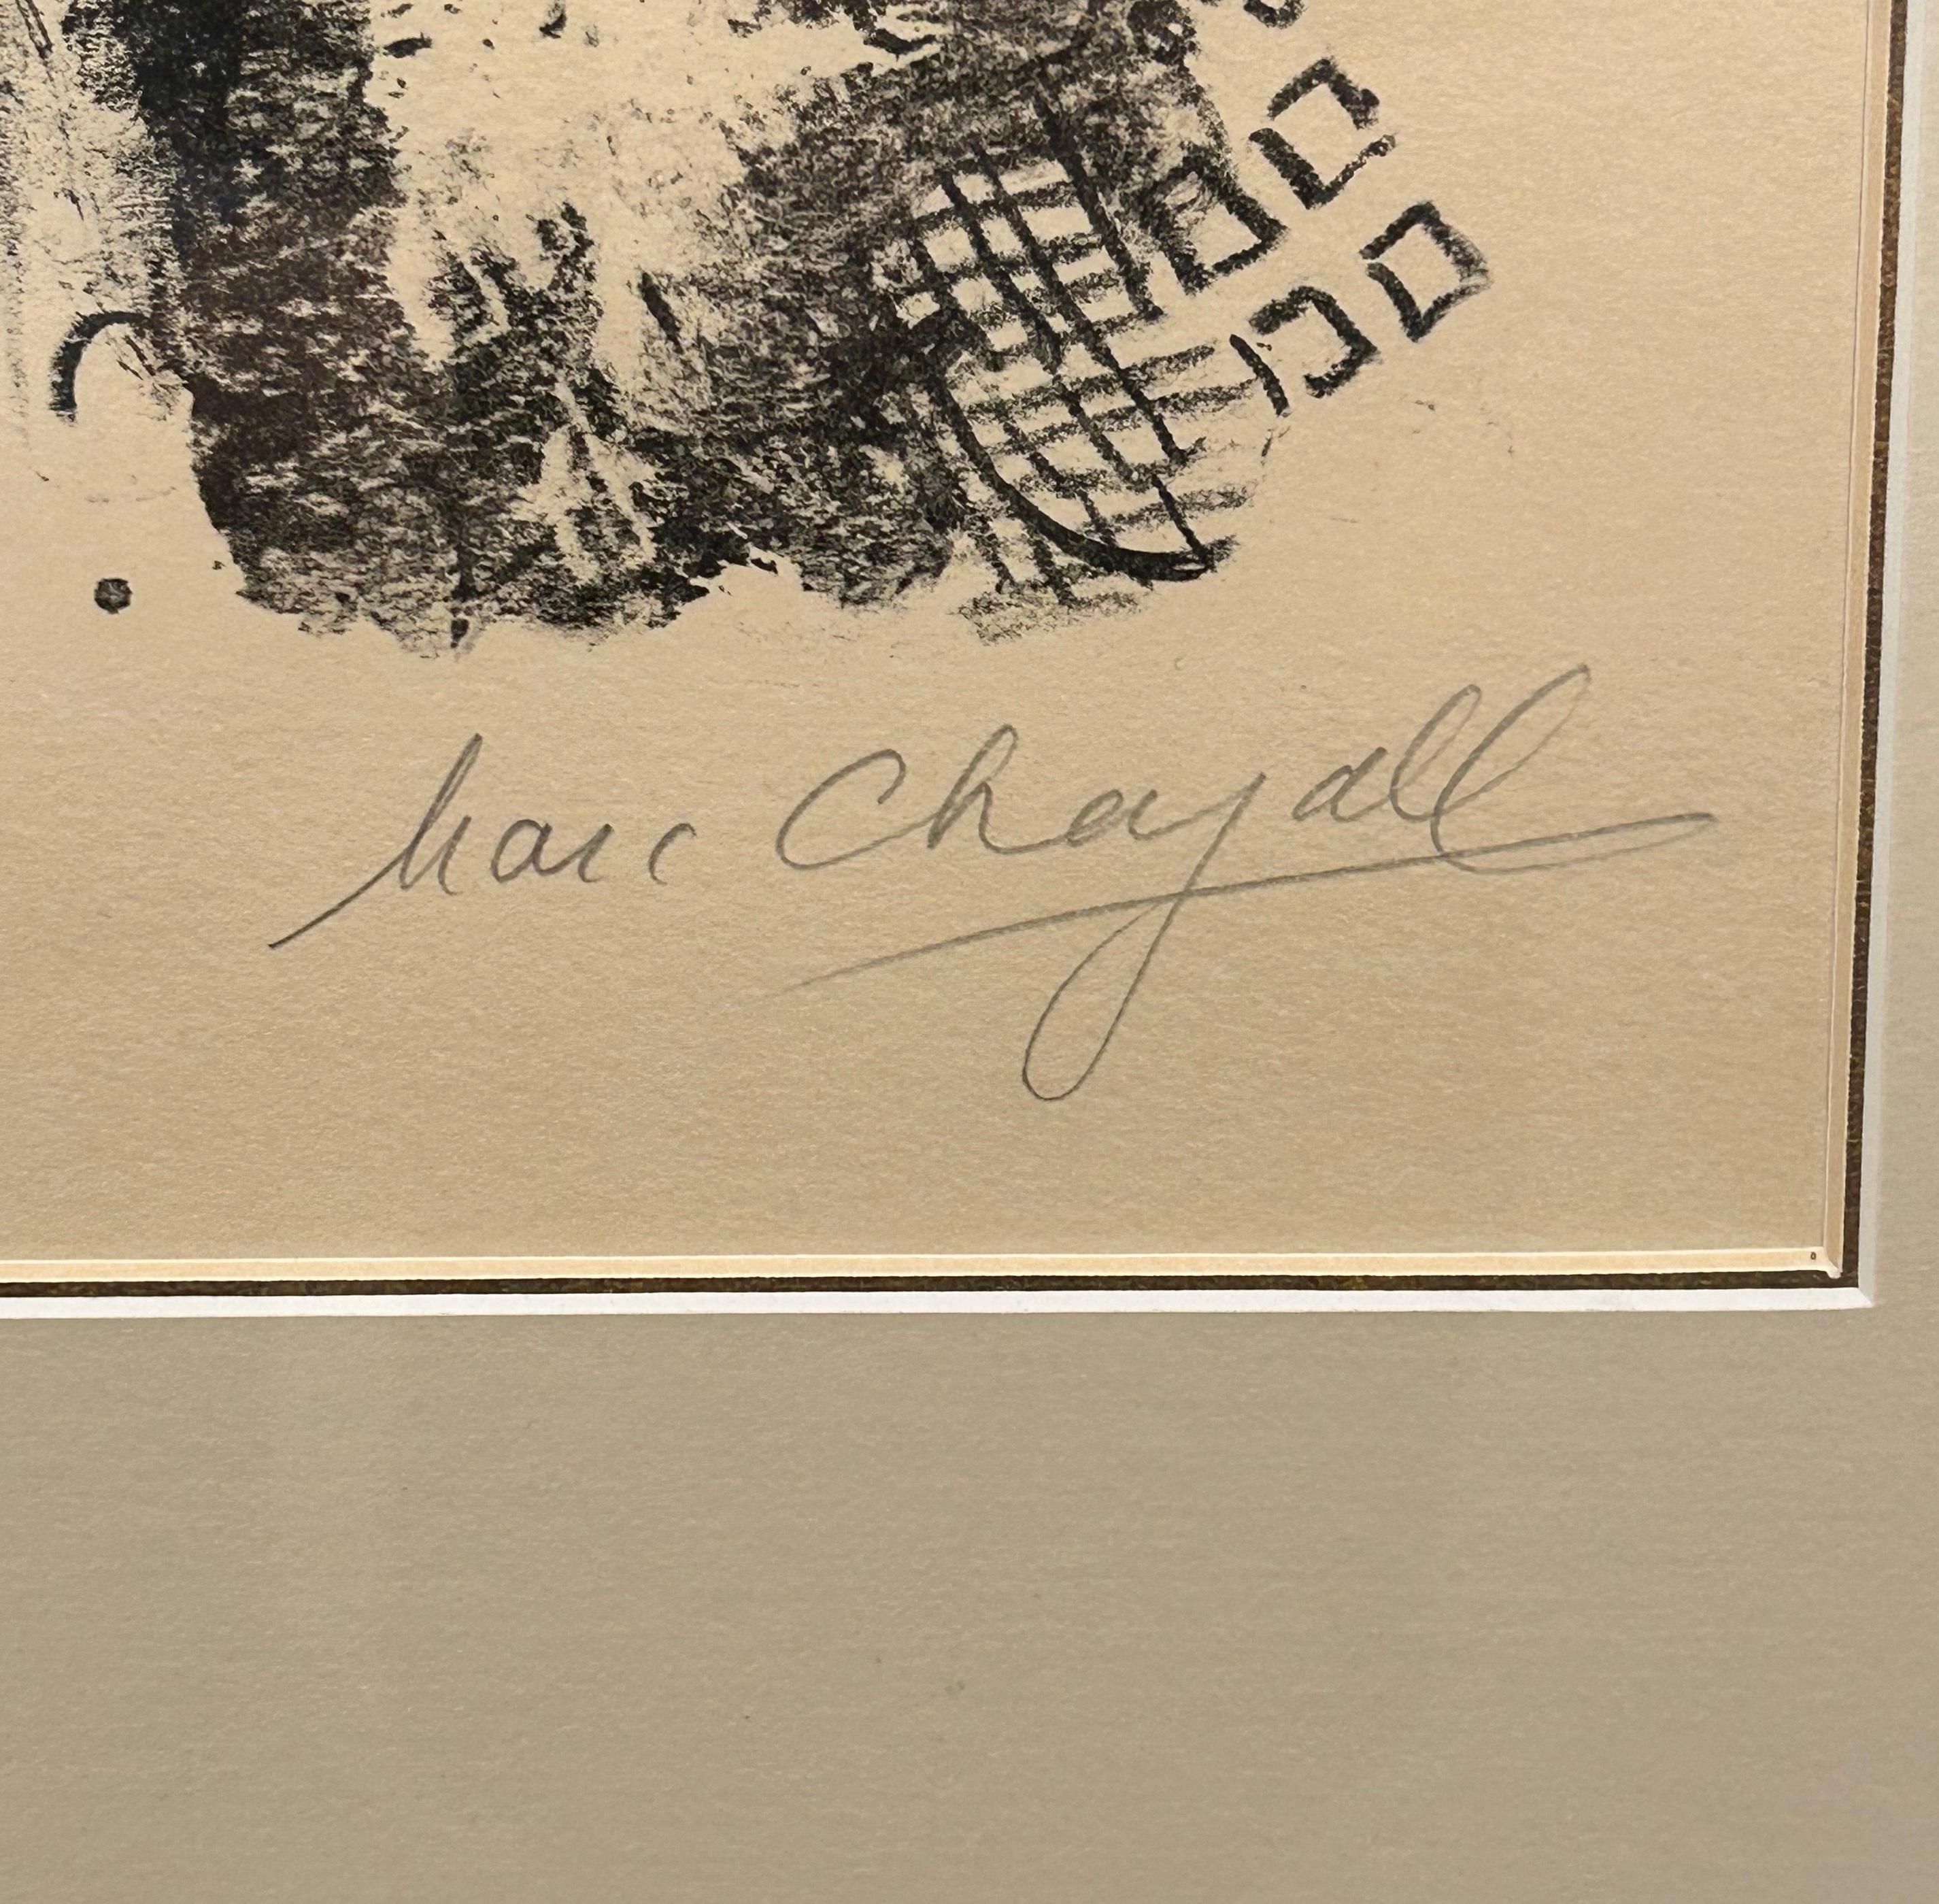 Couple a l’Oiseau (Couple with a Bird). Black and white lithograph on Arches paper created in 1959 by Marc Chagall, printed by Mourlot in Paris. Signed and numbered in pencil by the artist, edition 22/40. Image features a woman with a man behind